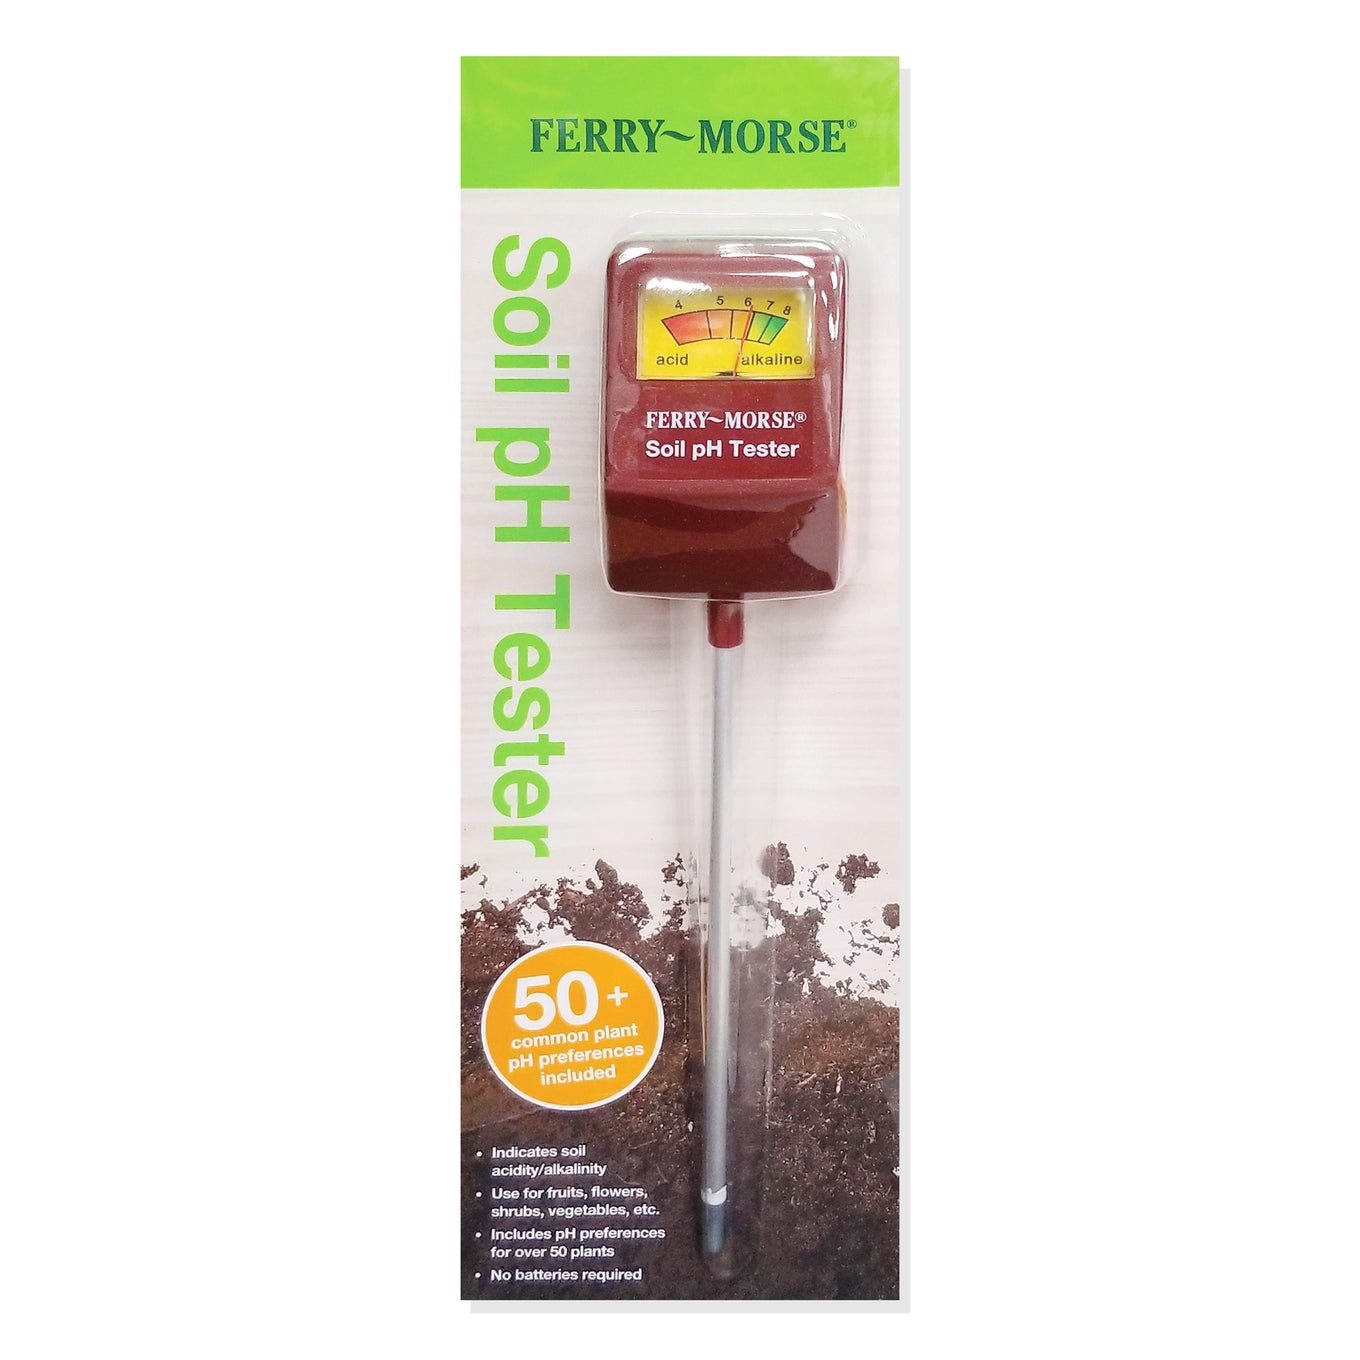 Ferry-Morse Easy-to-Use Electronic Soil pH Tester